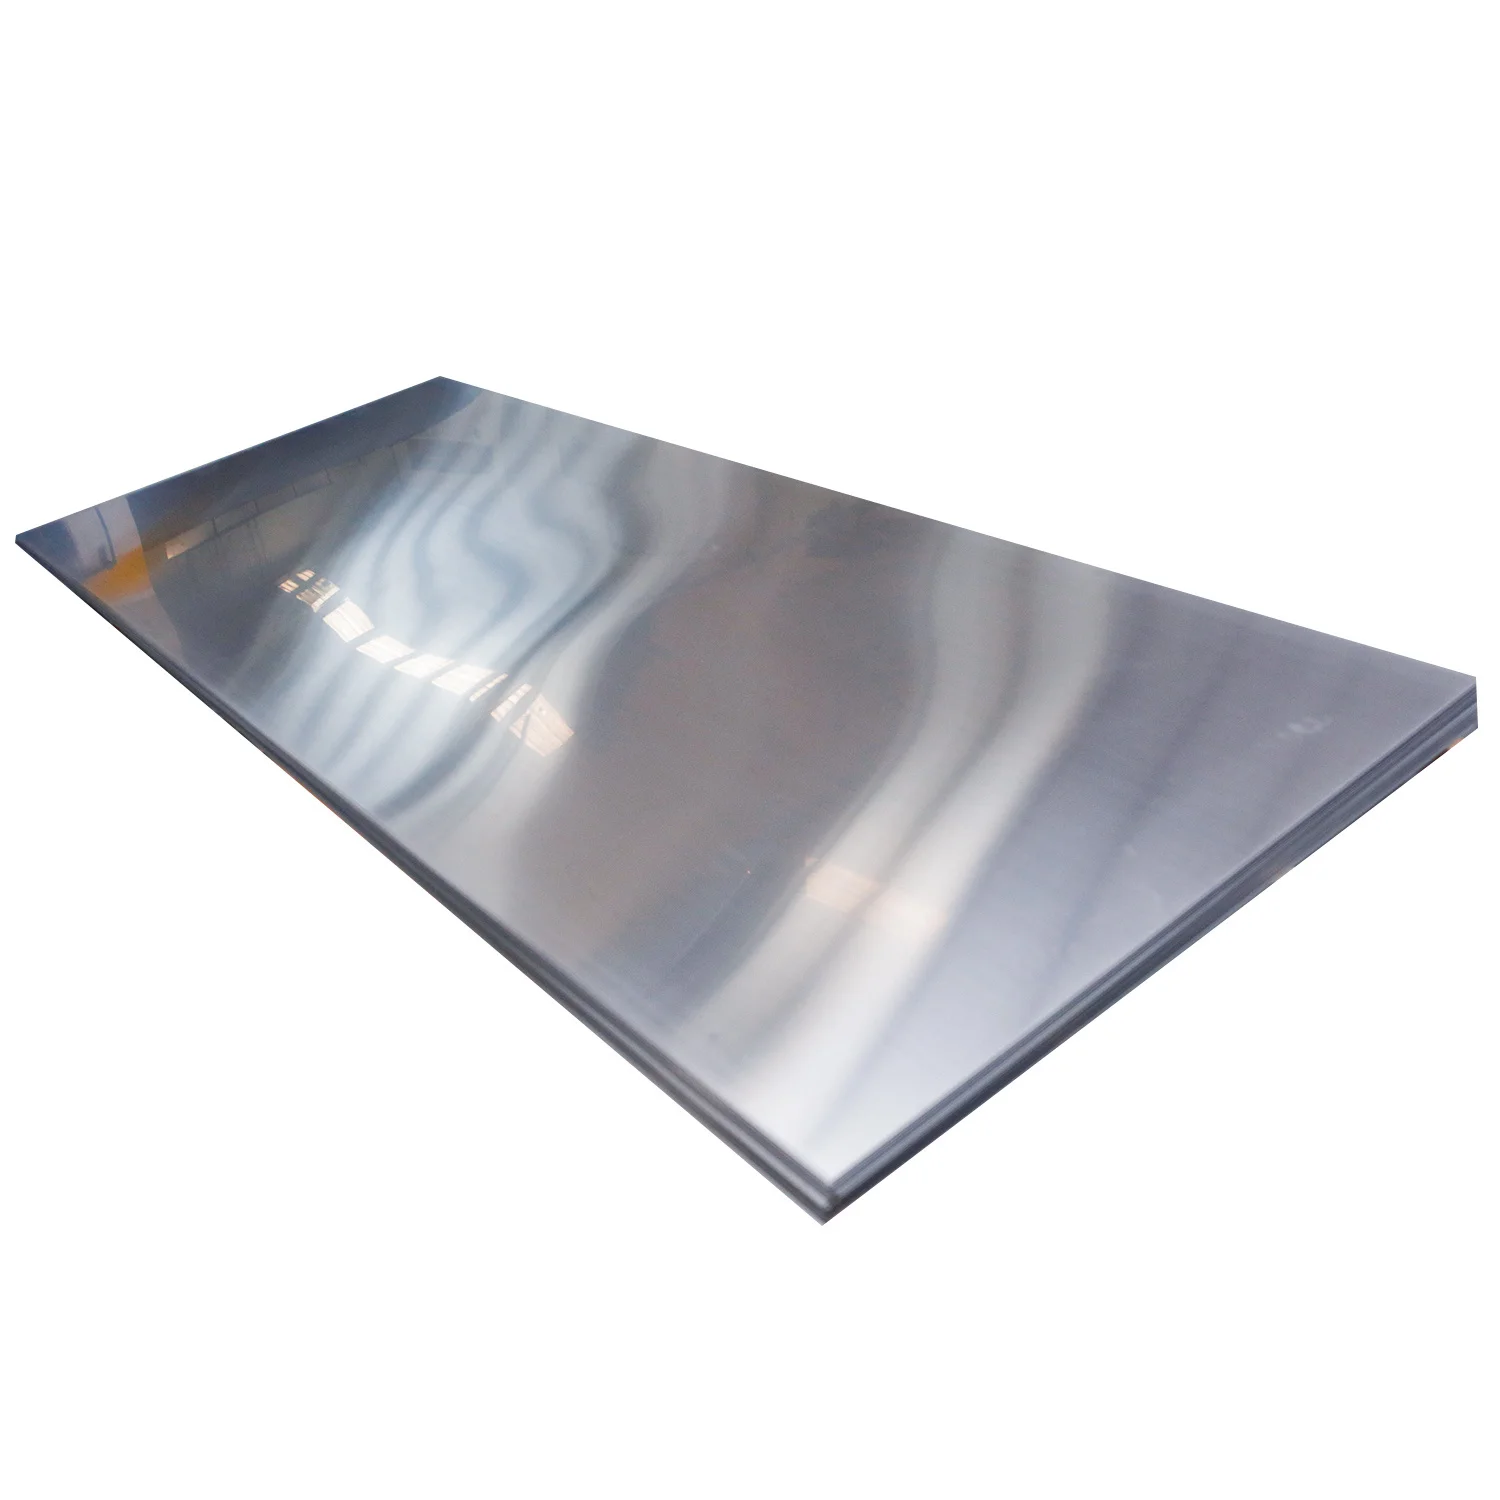 ASTM A204m SS316L Plate Mirror Surface Cold Rolled 304L Stainless Steel Sheet